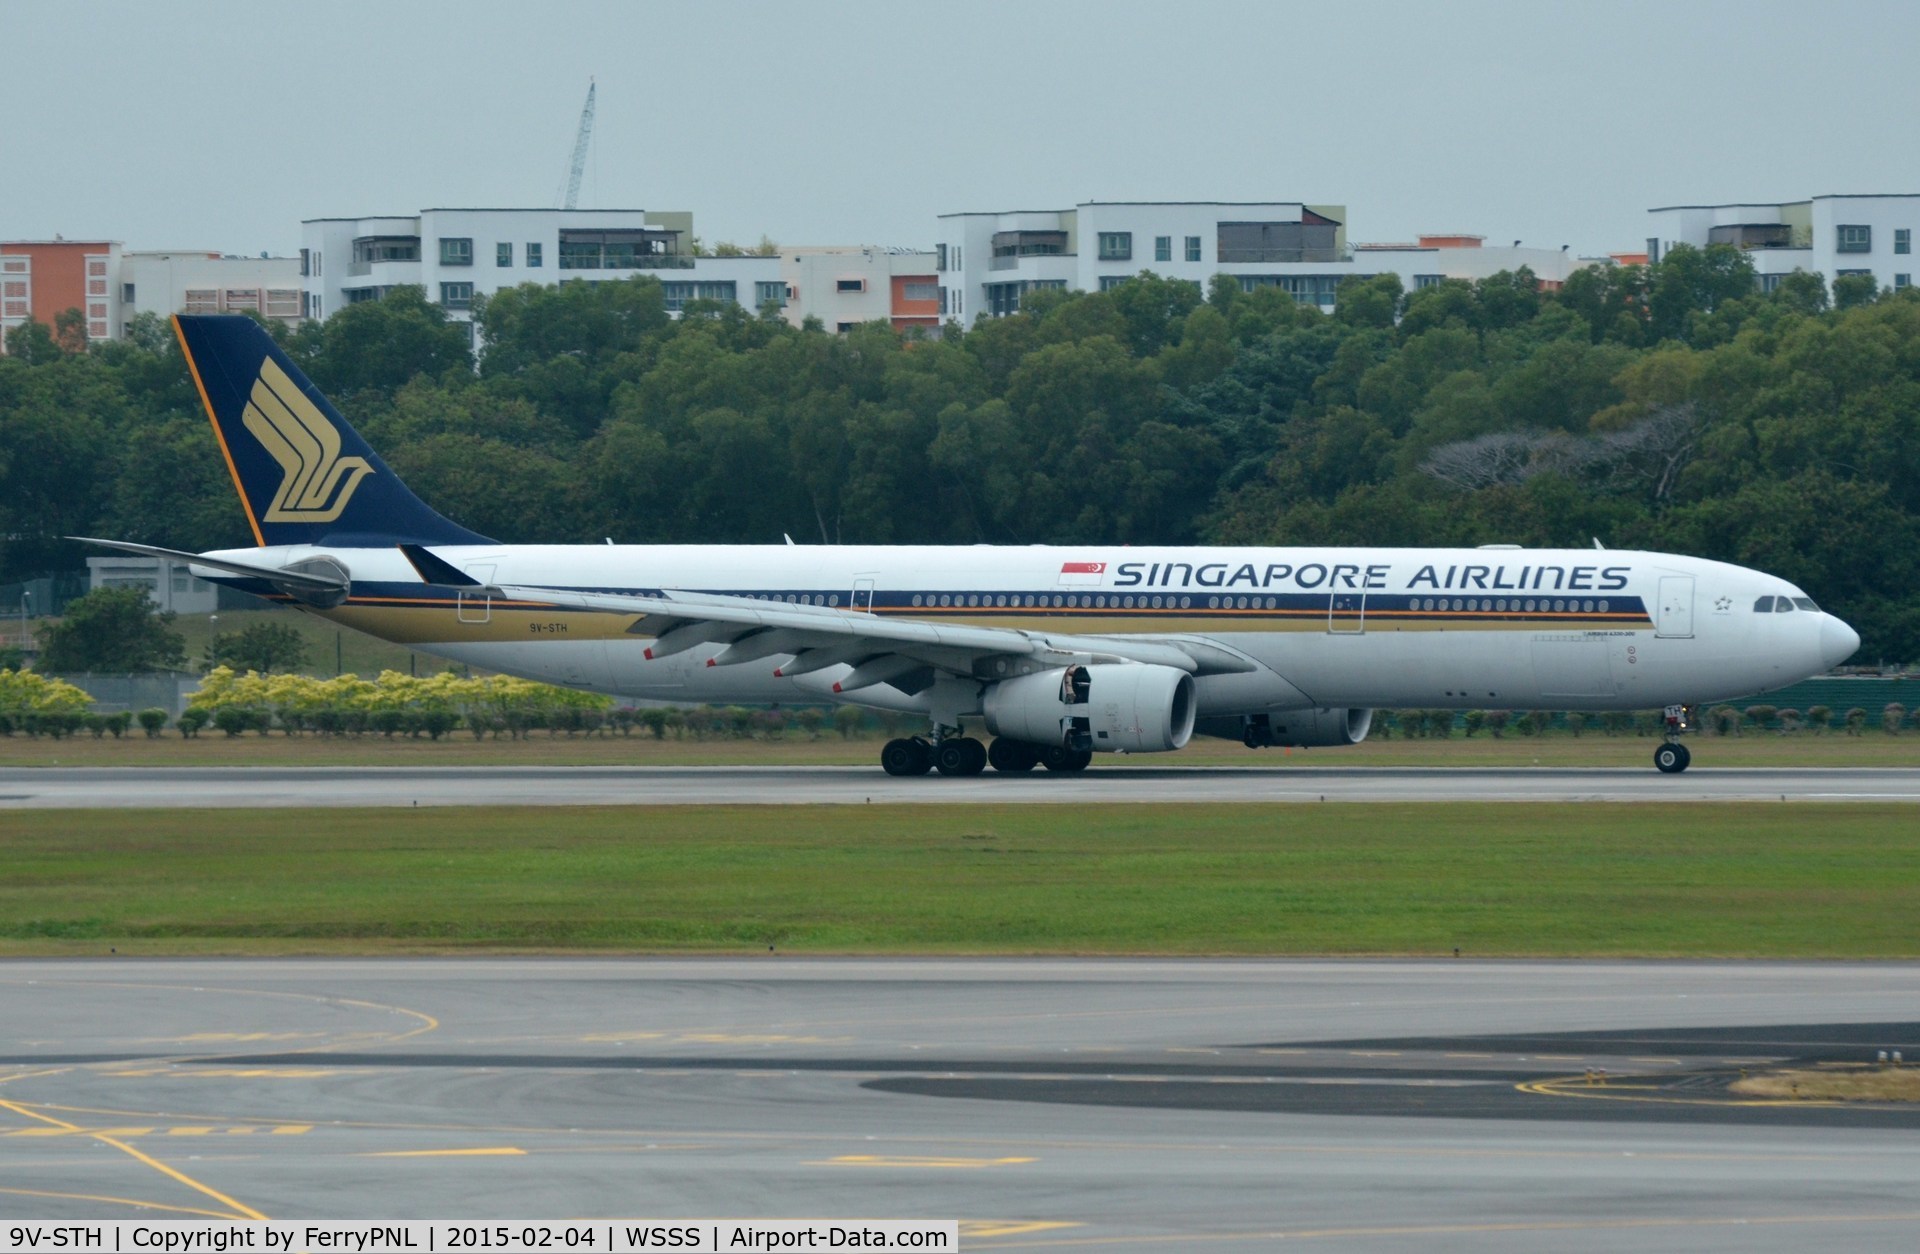 9V-STH, 2009 Airbus A330-343E C/N 1015, Singapore A333 coming to a stop.